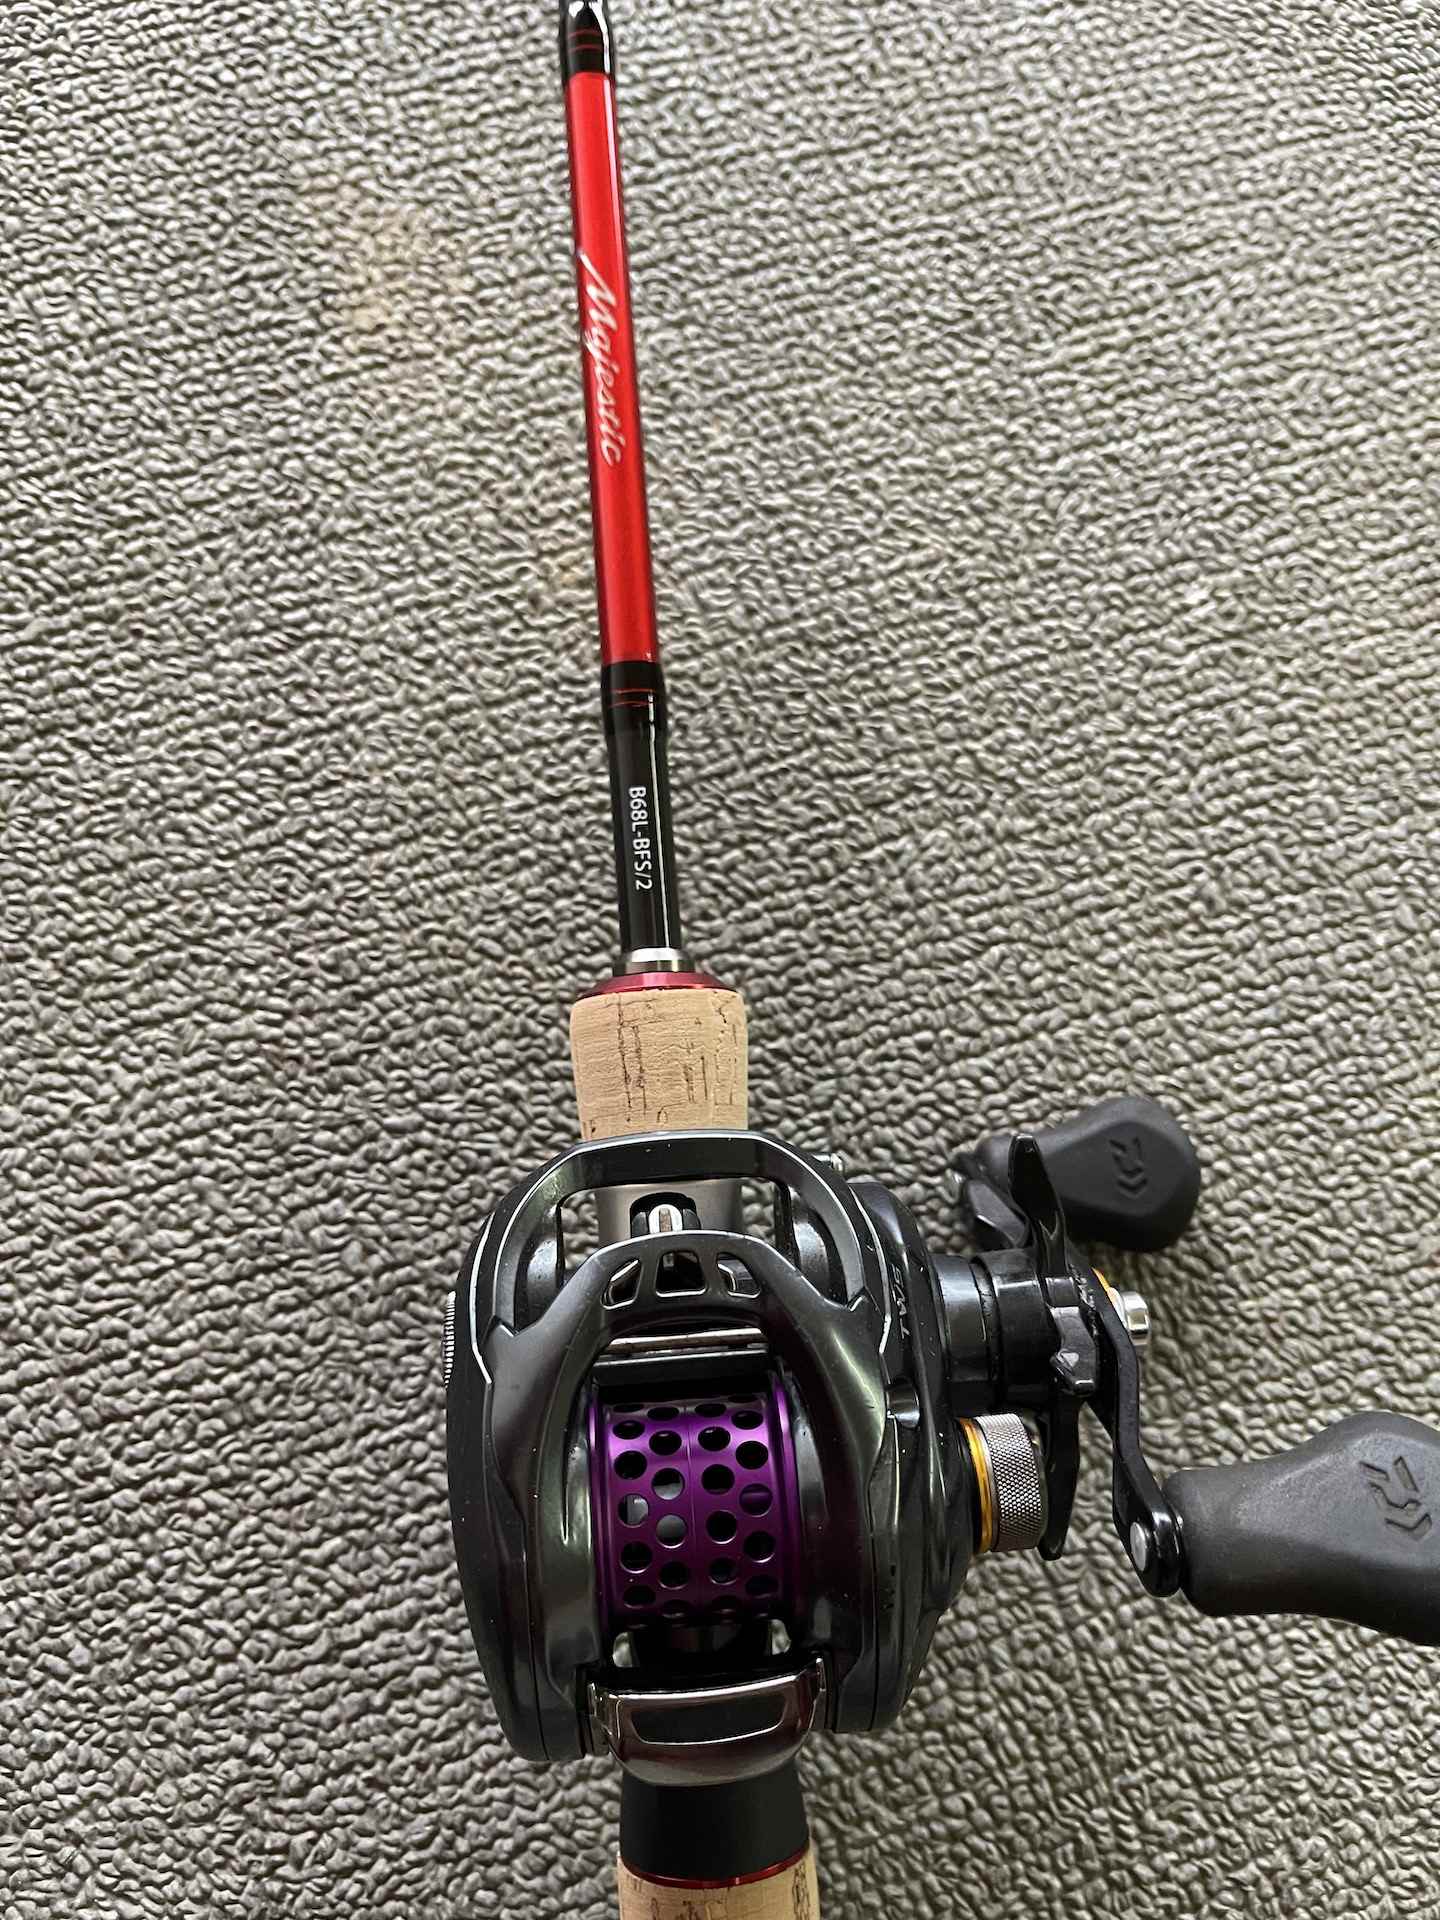 Aftermarket Shallow Spool - Fishing Rods, Reels, Line, and Knots